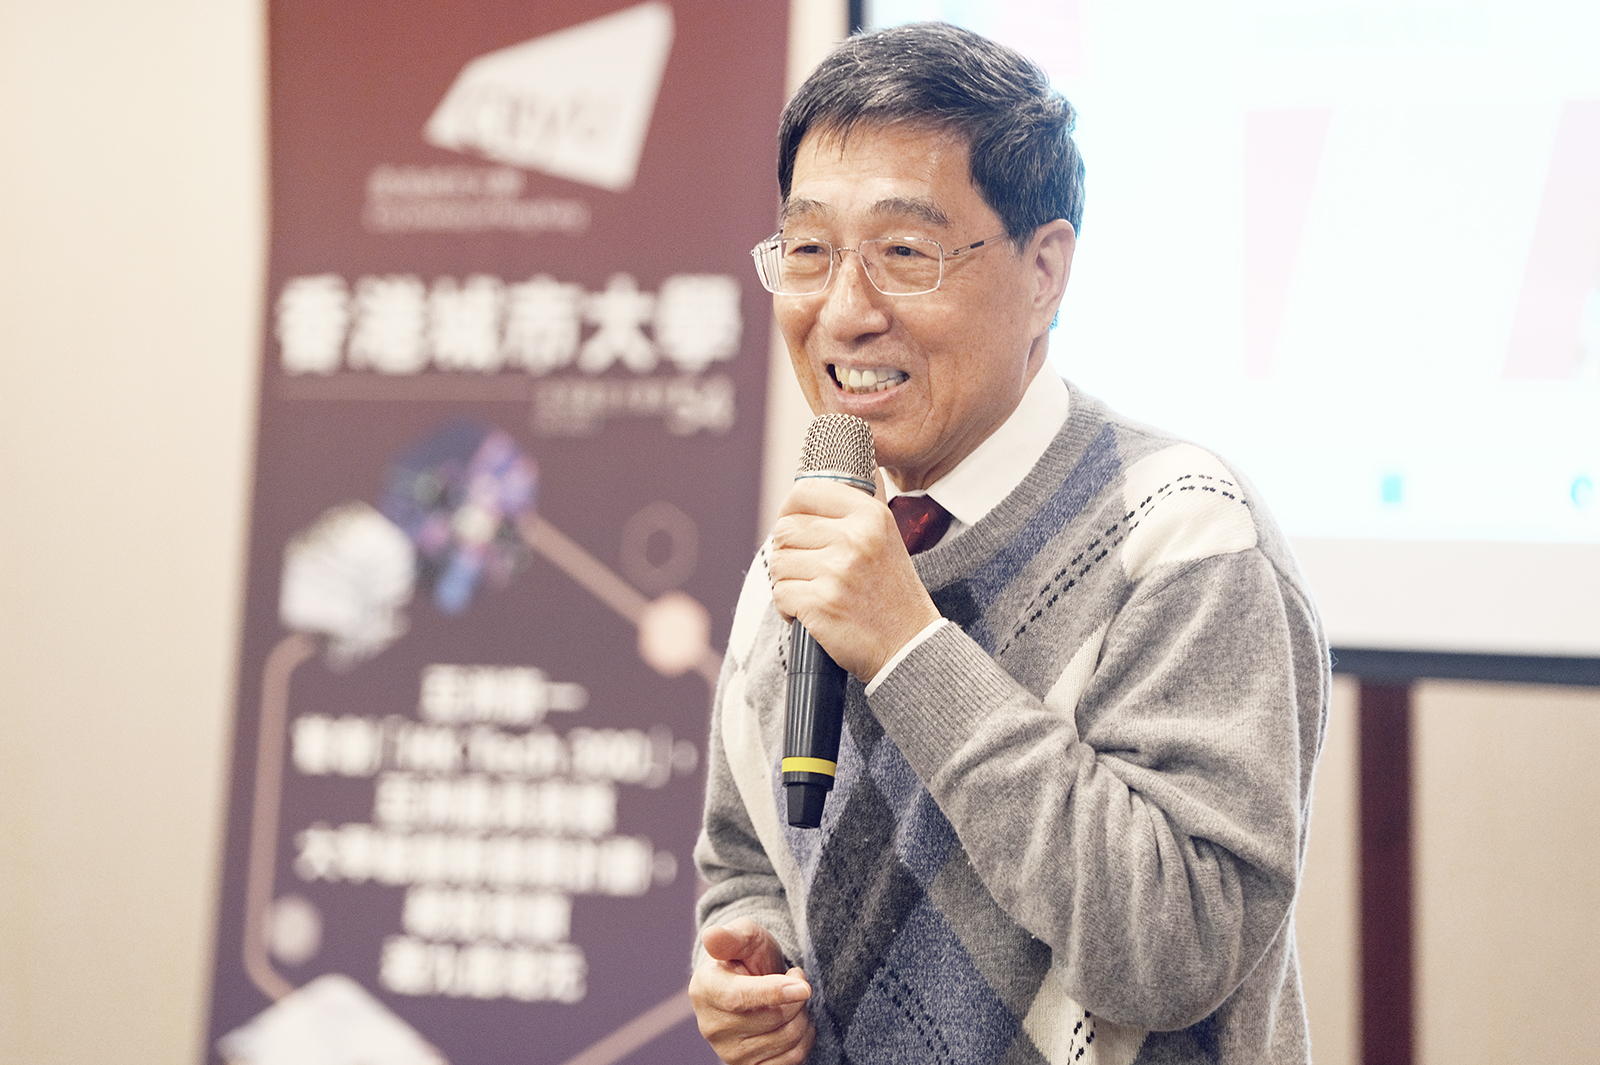 President Kuo shared CityU’s recent achievements at the dinner reception.